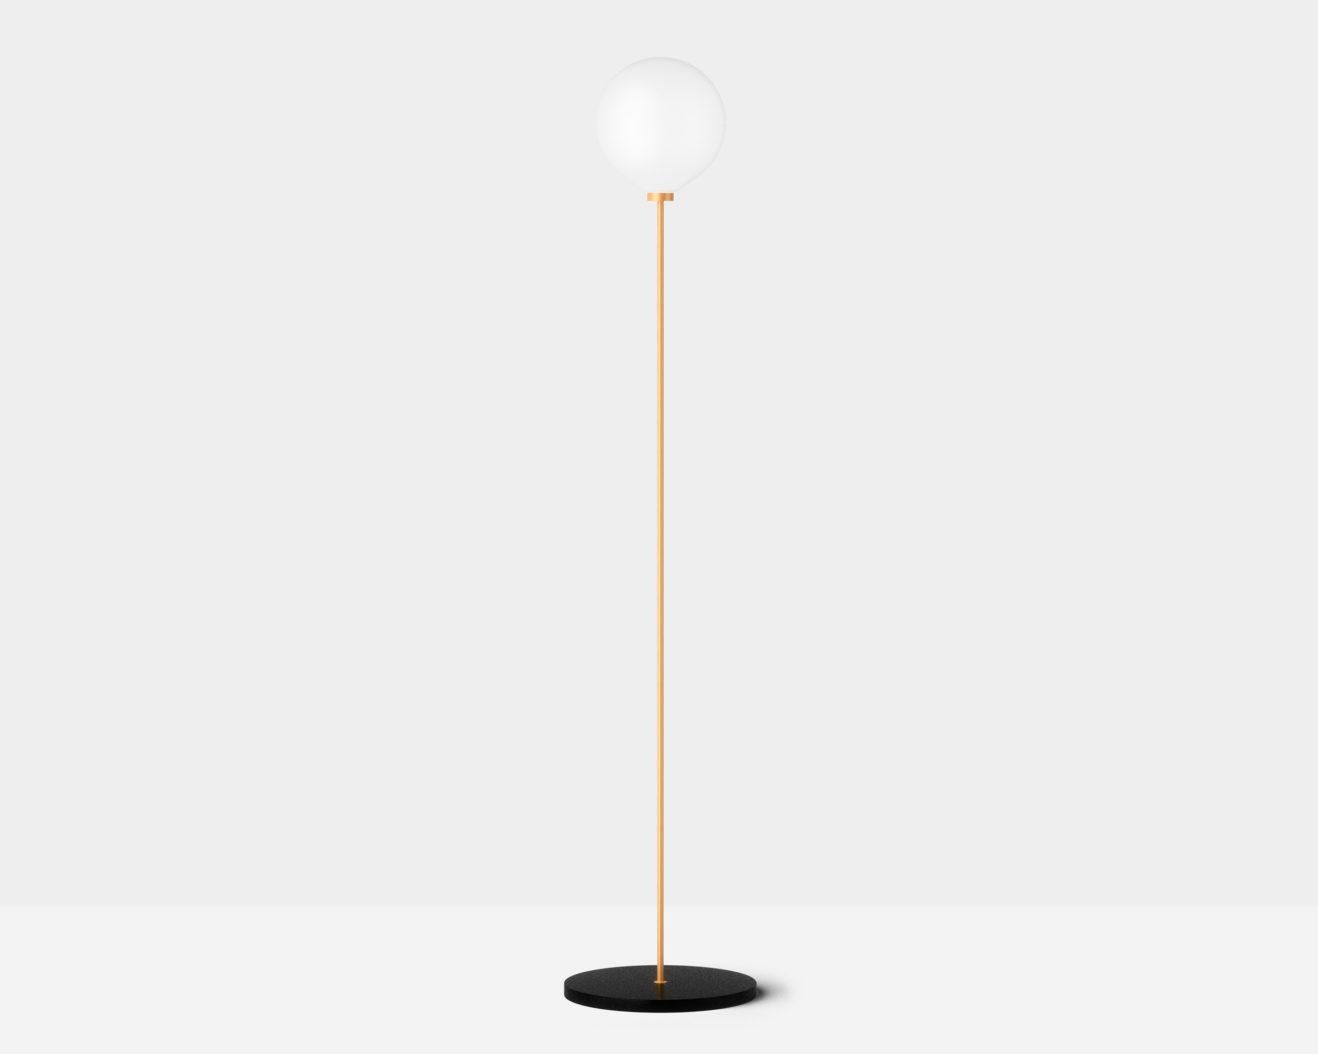 Onis is a Minimalist floor lamp design by Wishnya Design Studio.
Brass.
White marble or black granite

Two finishes: white marble or black granite

Measures: H 66cm, L 20cm
LED G4 35W 220V (dimmable)

Same model also available as table lamp.